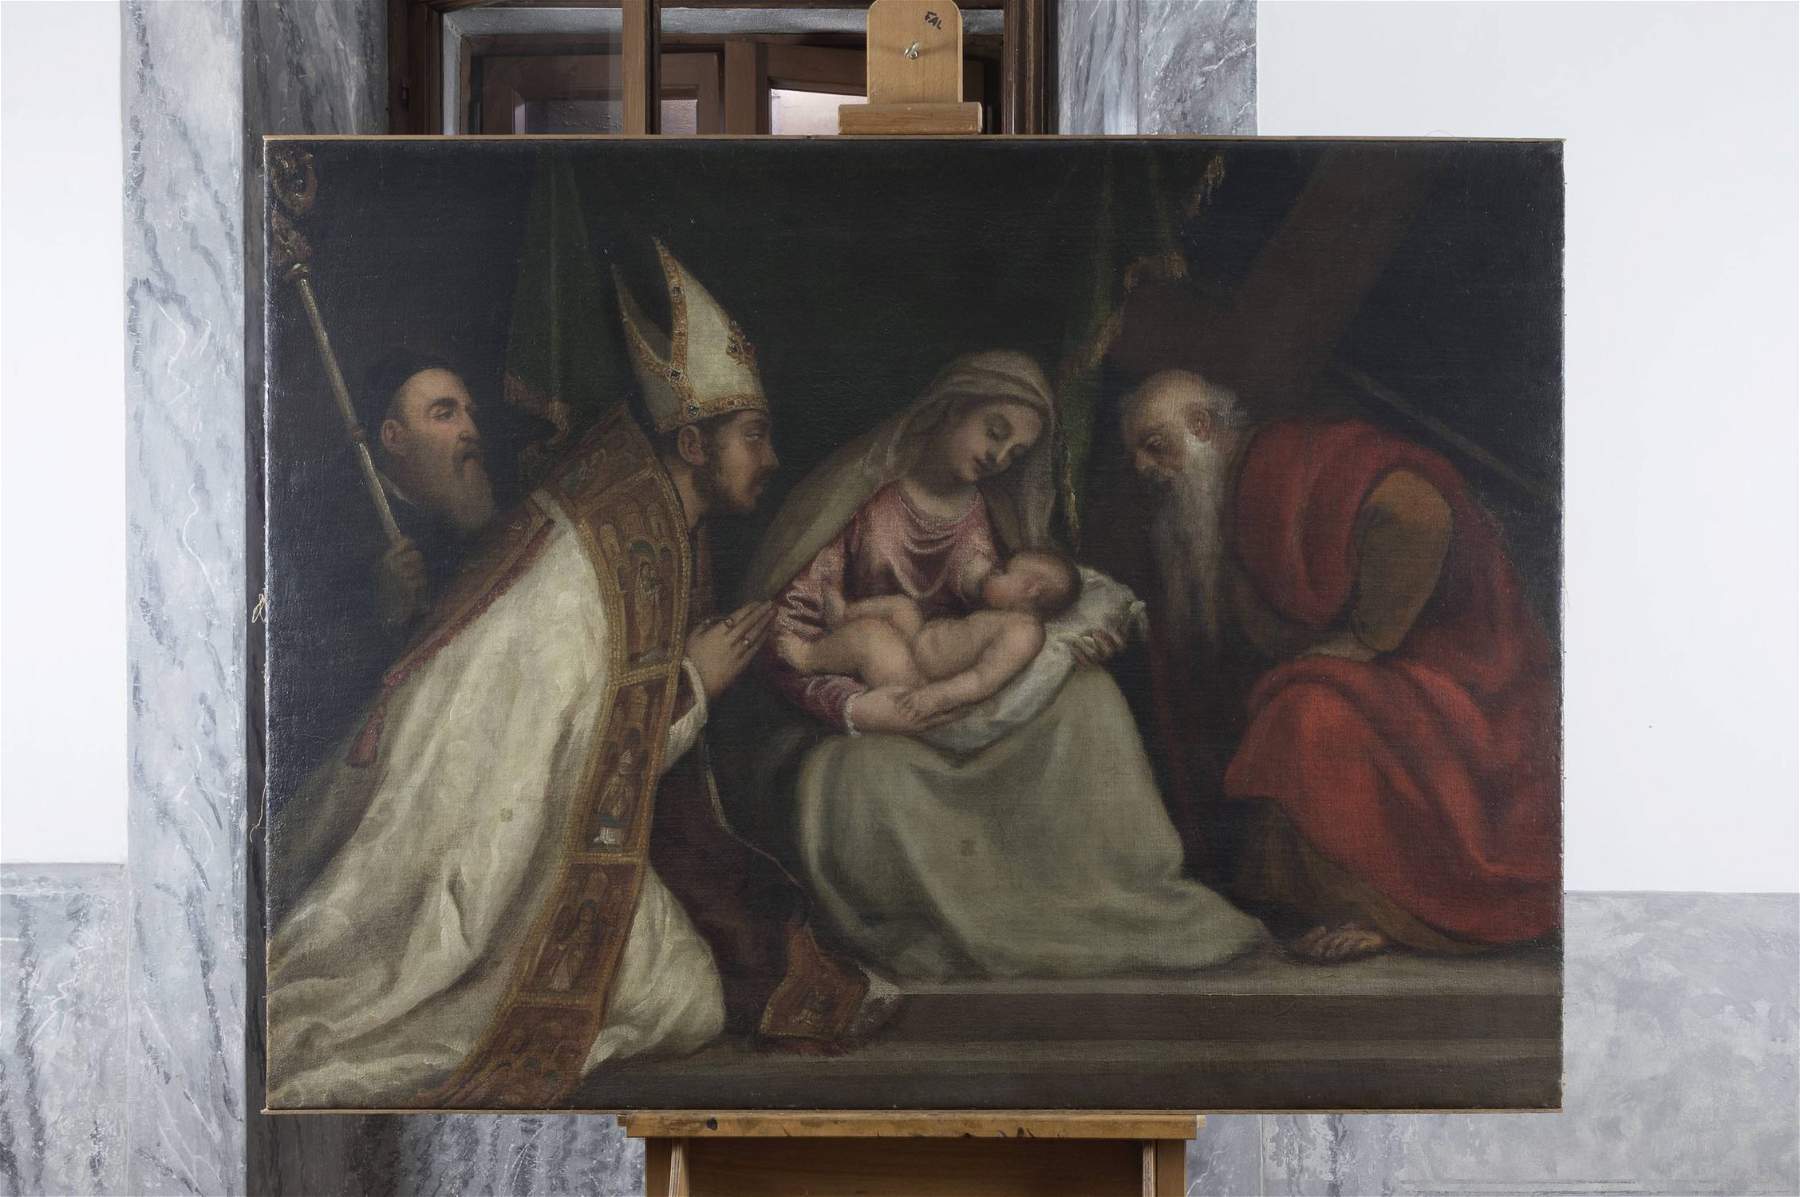 The altarpiece that Titian painted for his Pieve di Cadore will be restored.